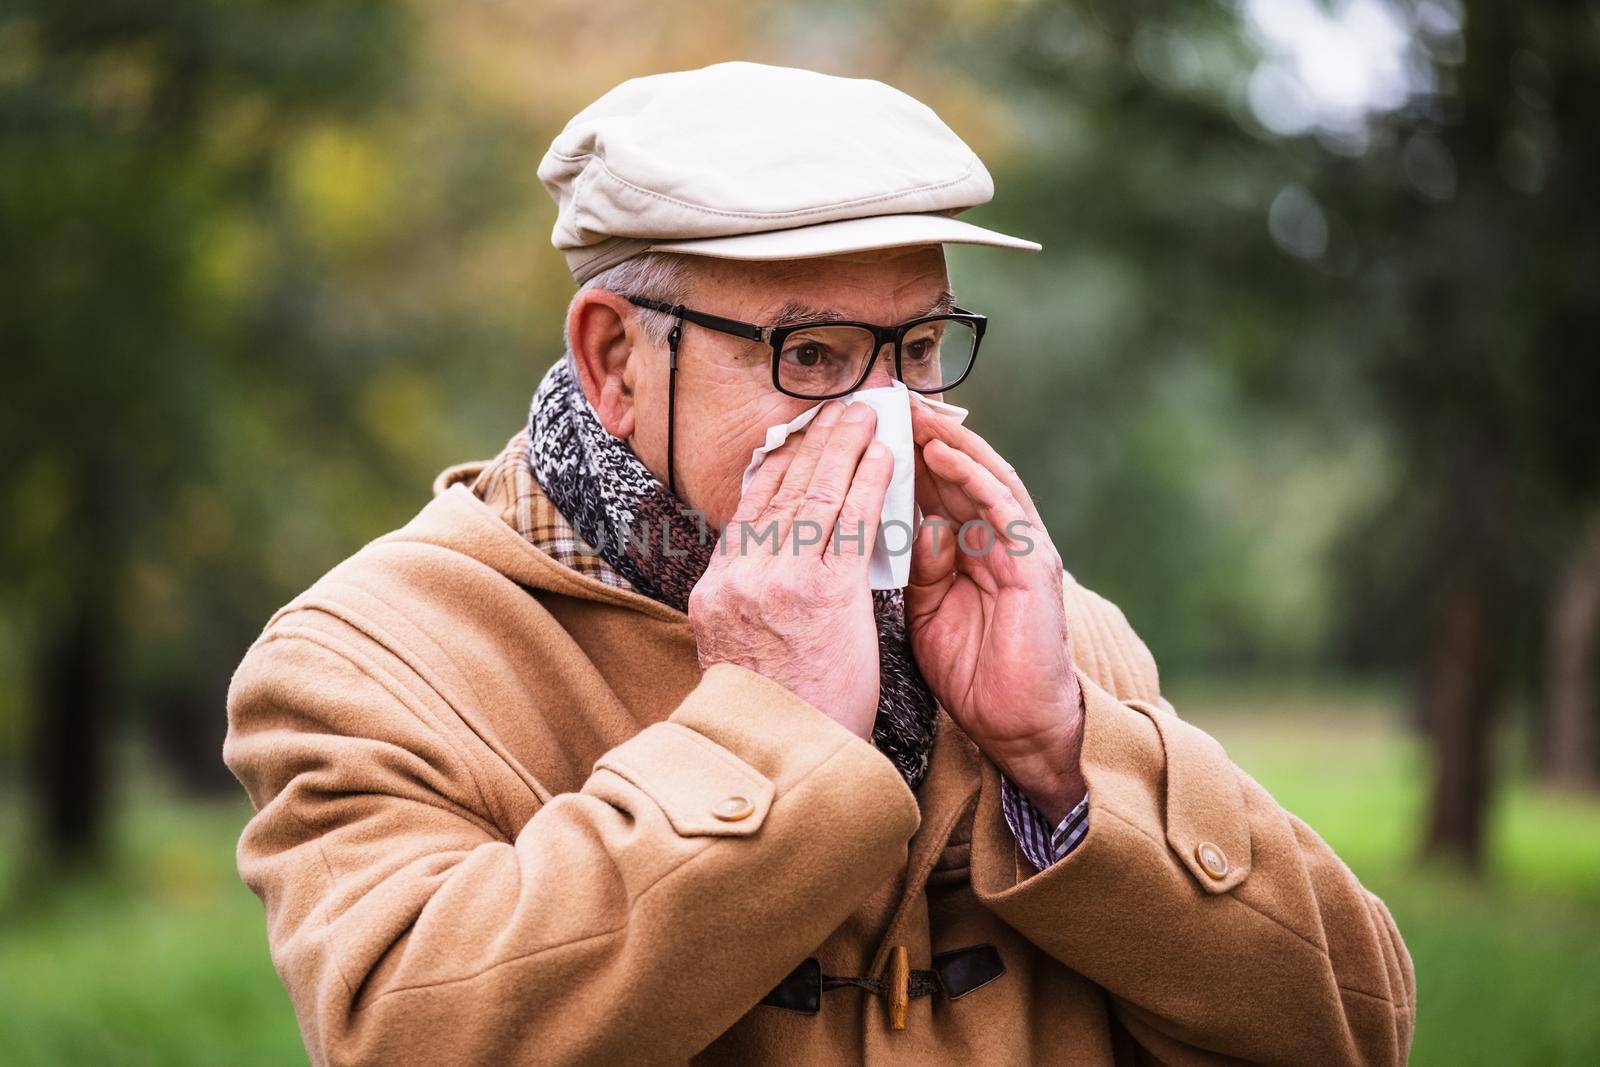 Outdoor portrait of senior man who is blowing nose in winter time in park.